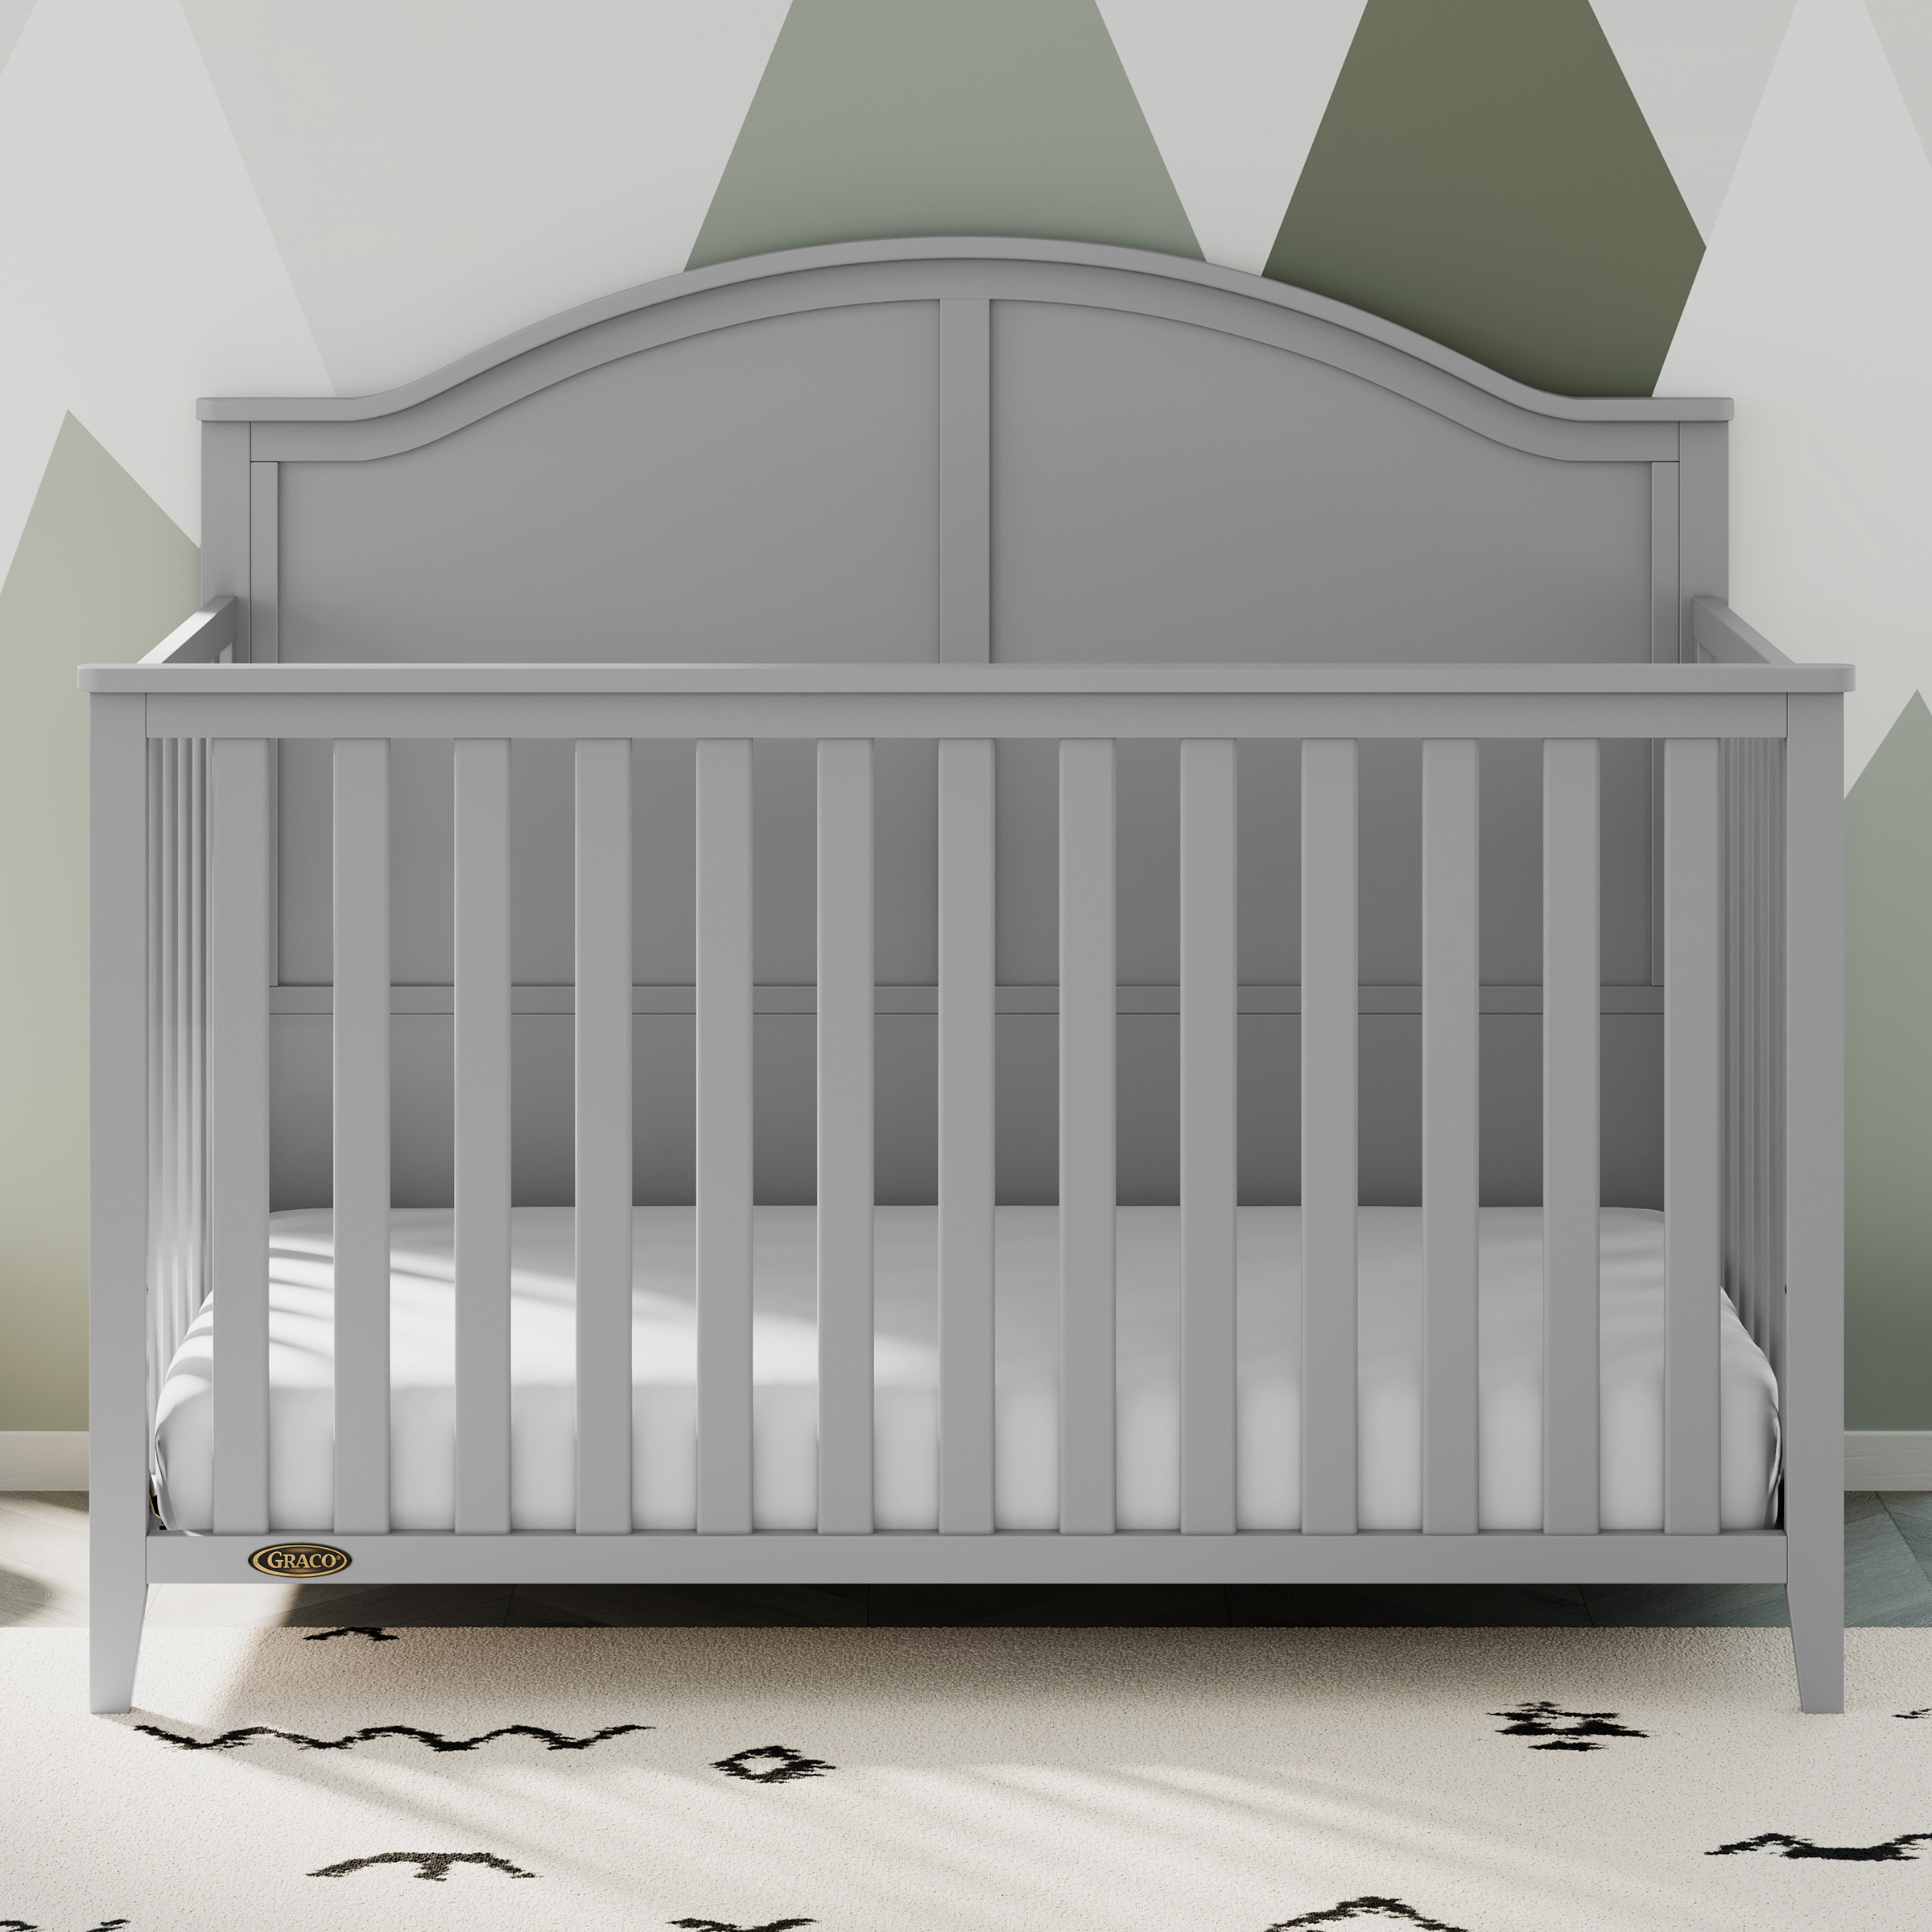 Graco Wilfred 5-in-1 Convertible Baby Crib, Pebble Gray - image 3 of 13